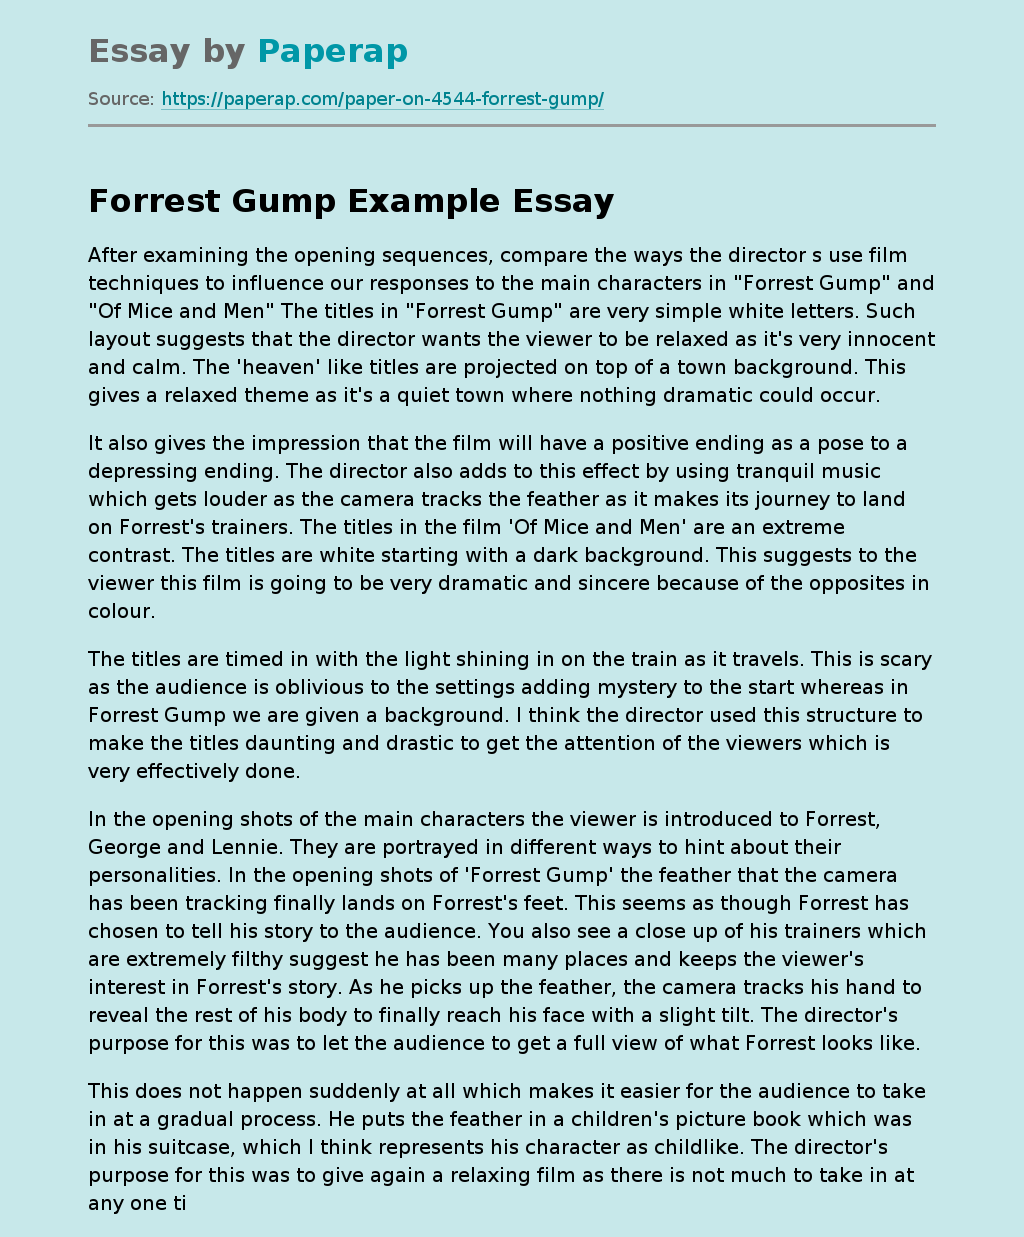 Forrest Gump Example